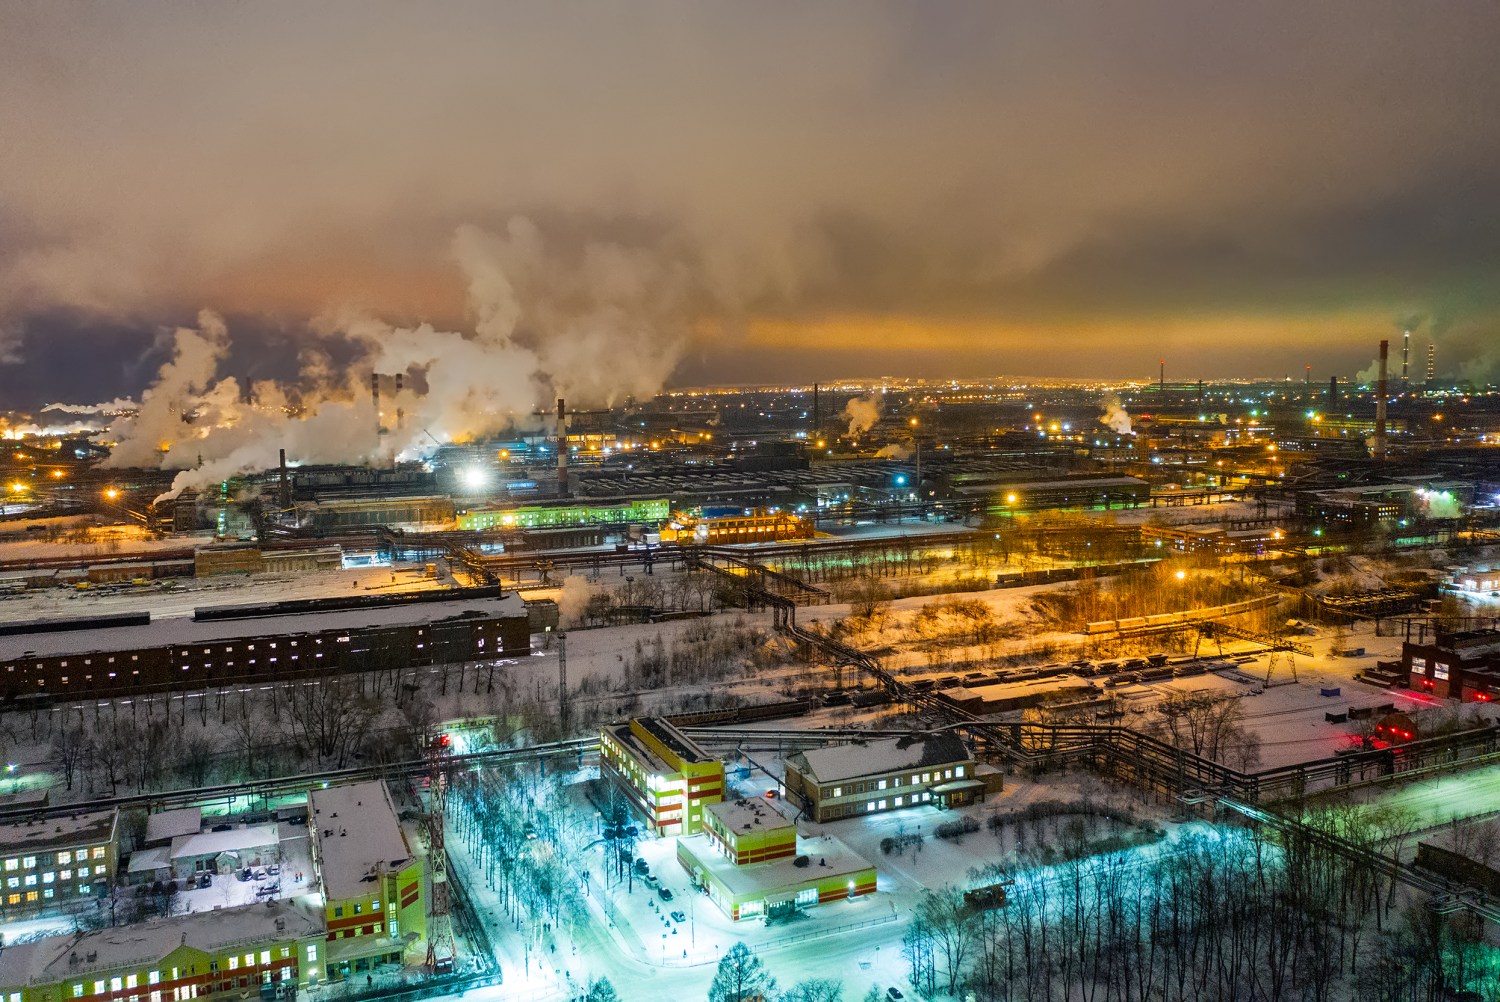 Evening view of smoke billowing from an industrial zone